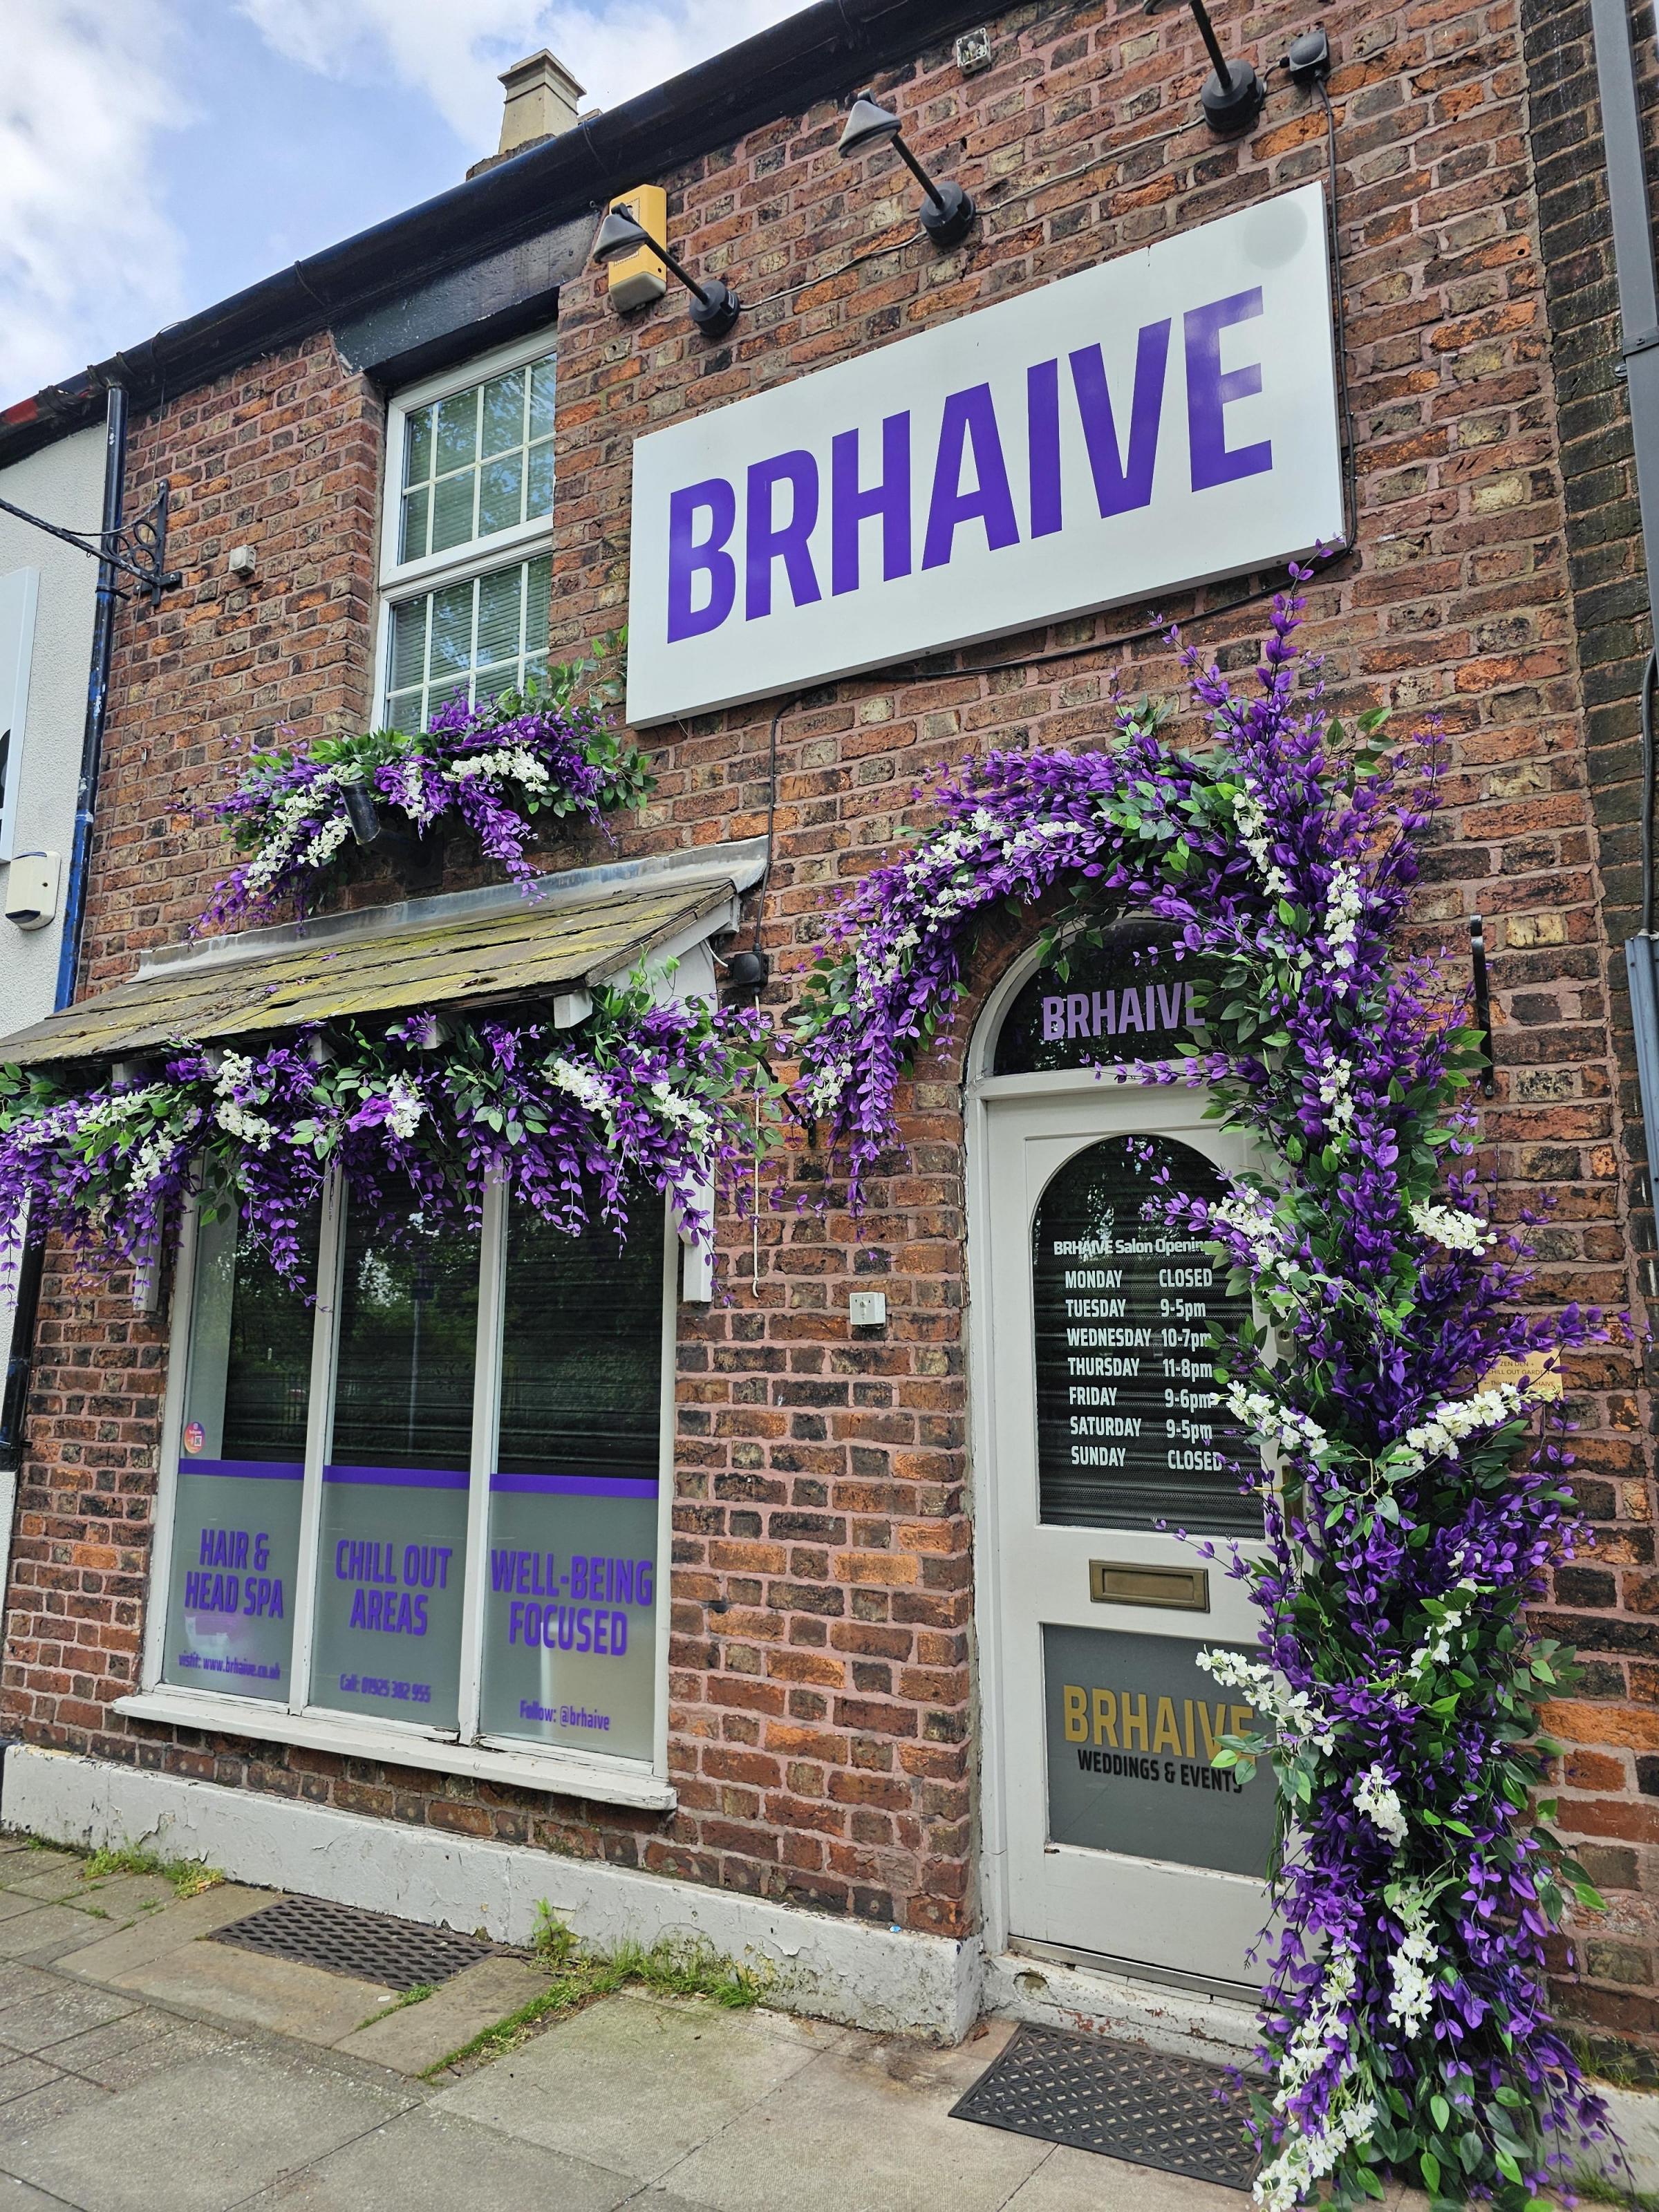 Brhaive opened on London Road in Stockton Heath just before the Covid-19 pandemic